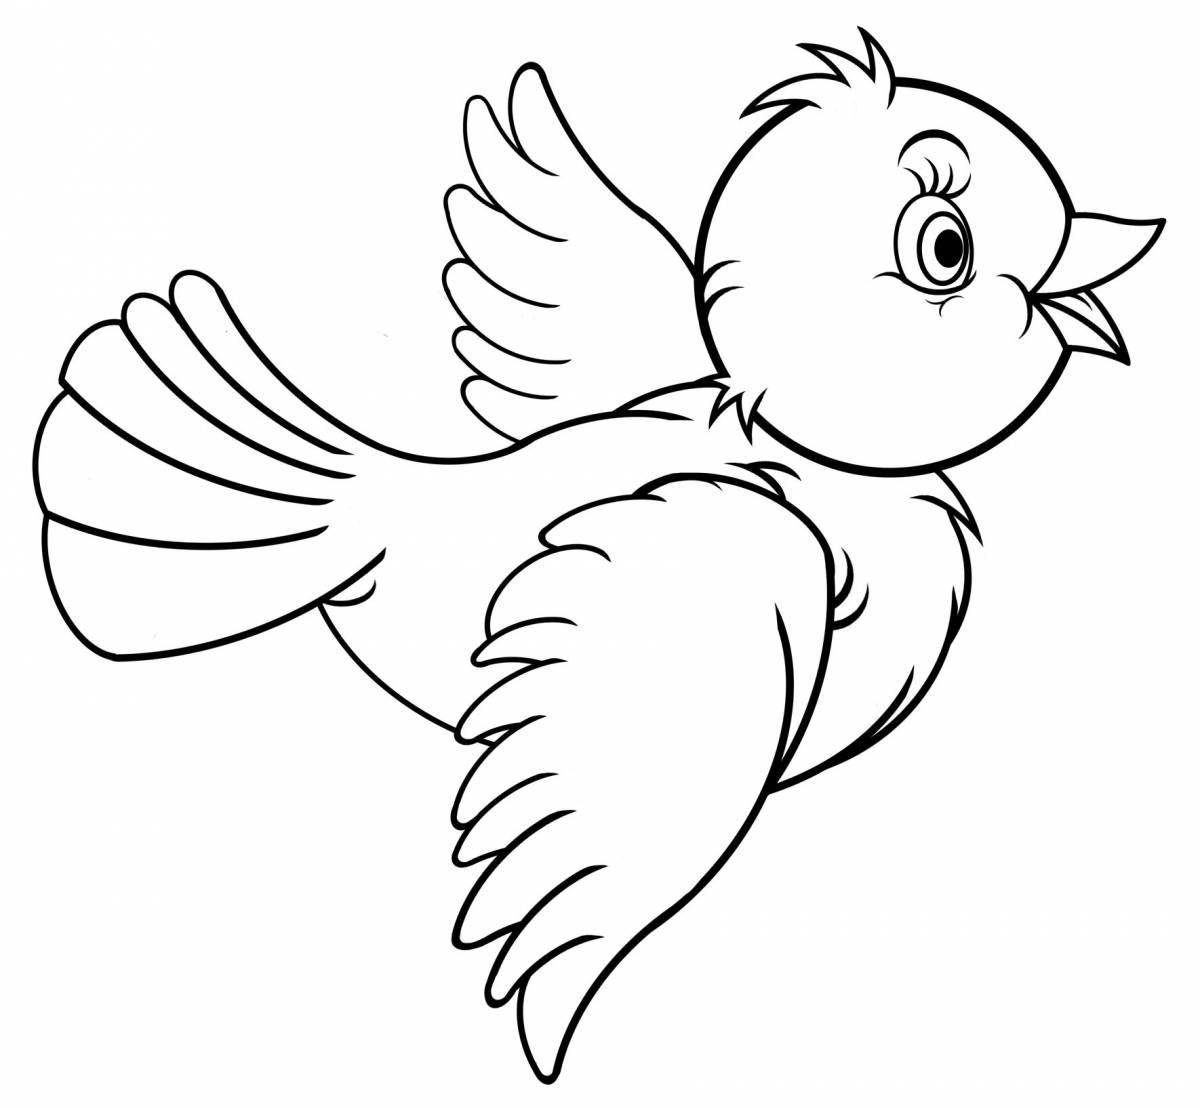 Adorable bird coloring page for babies